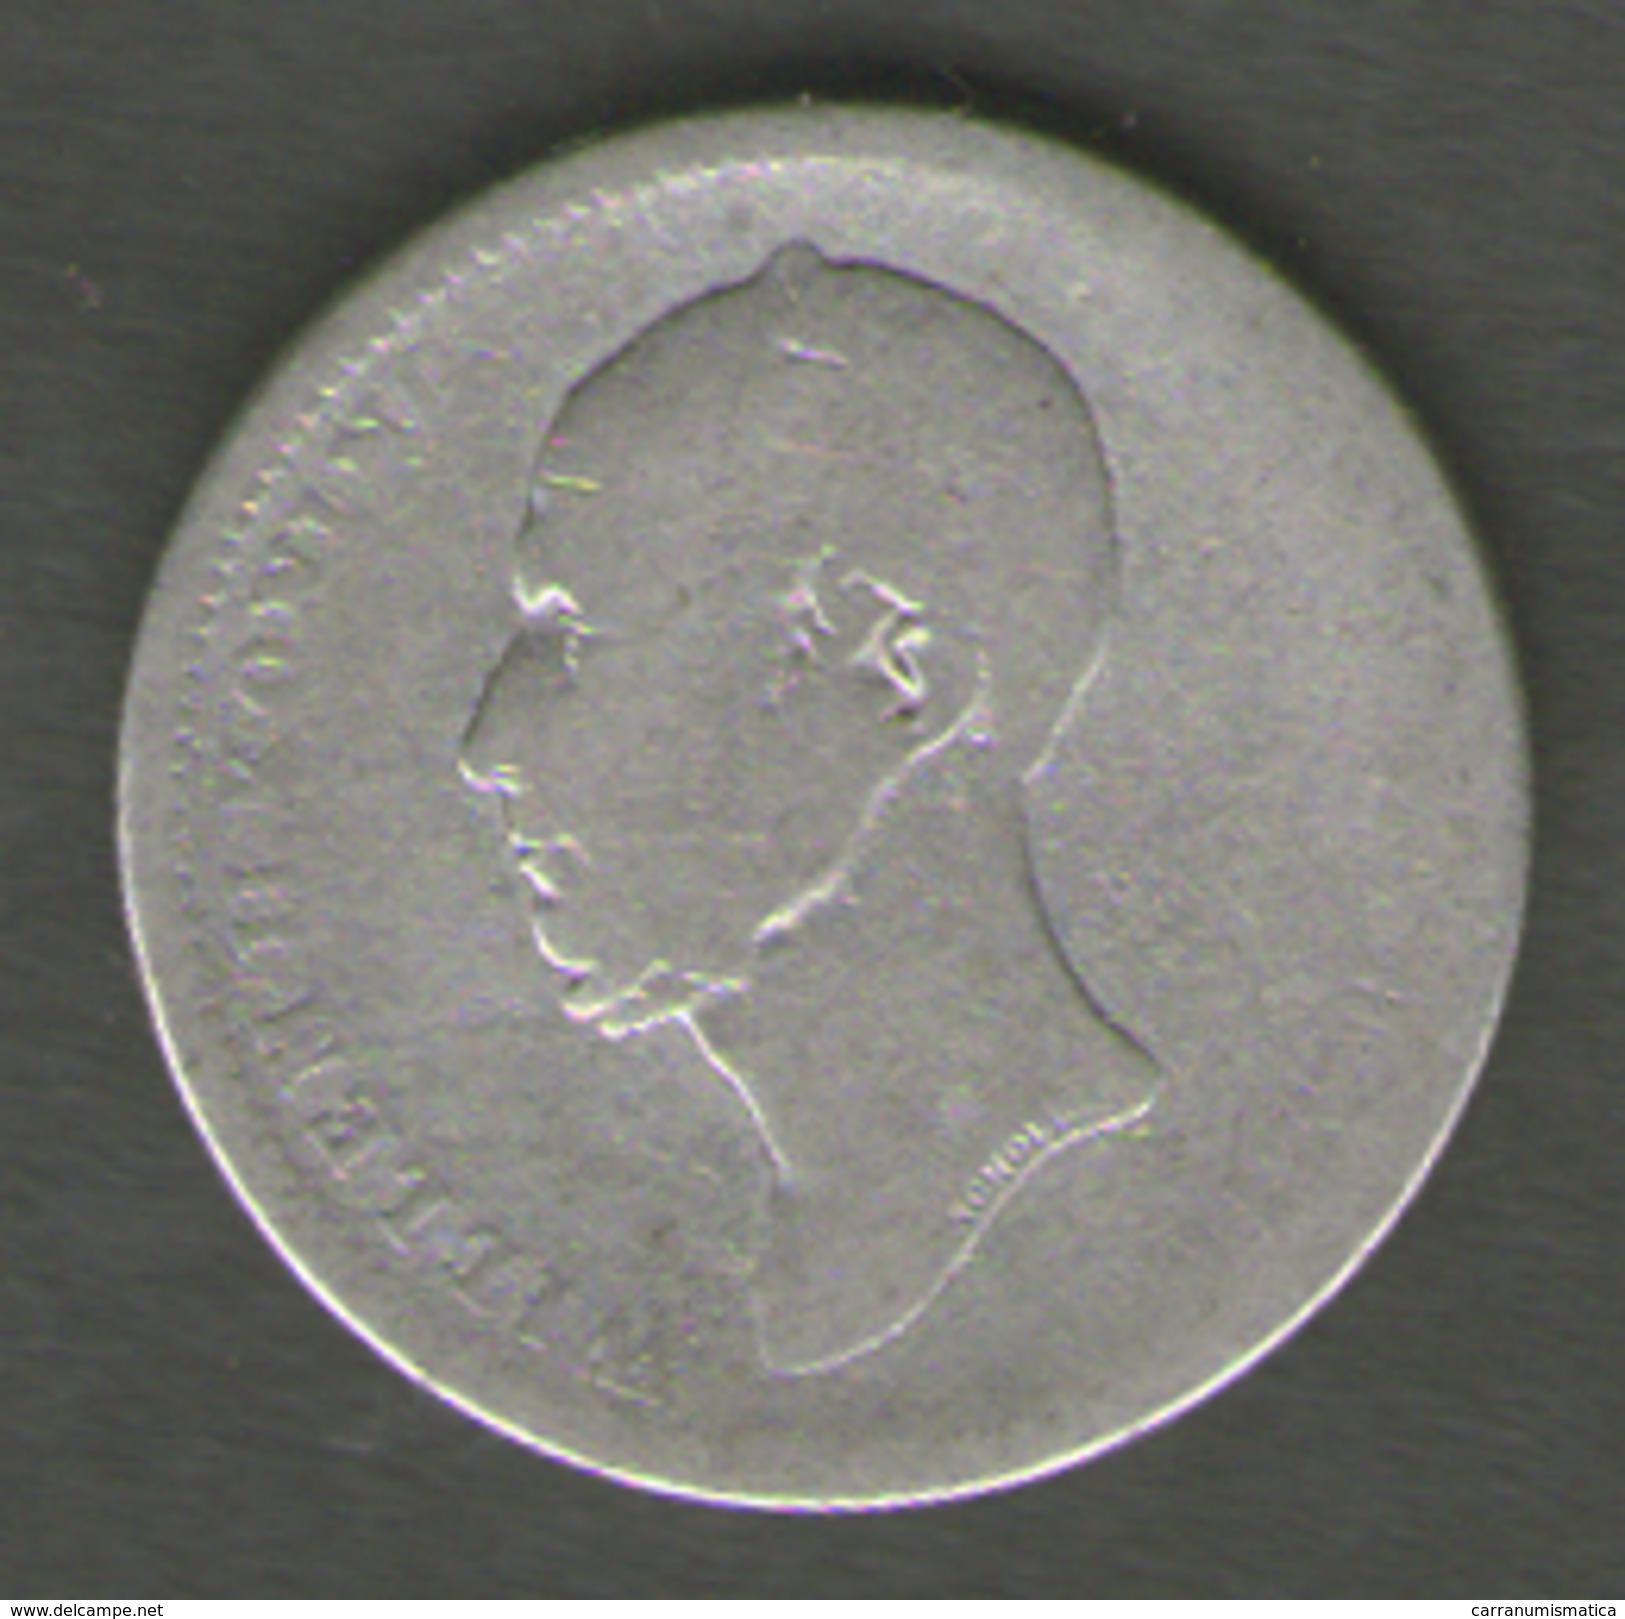 PAESI PASSI 25 CENTS 1849 AG SILVER - 1840-1849: Willem II.